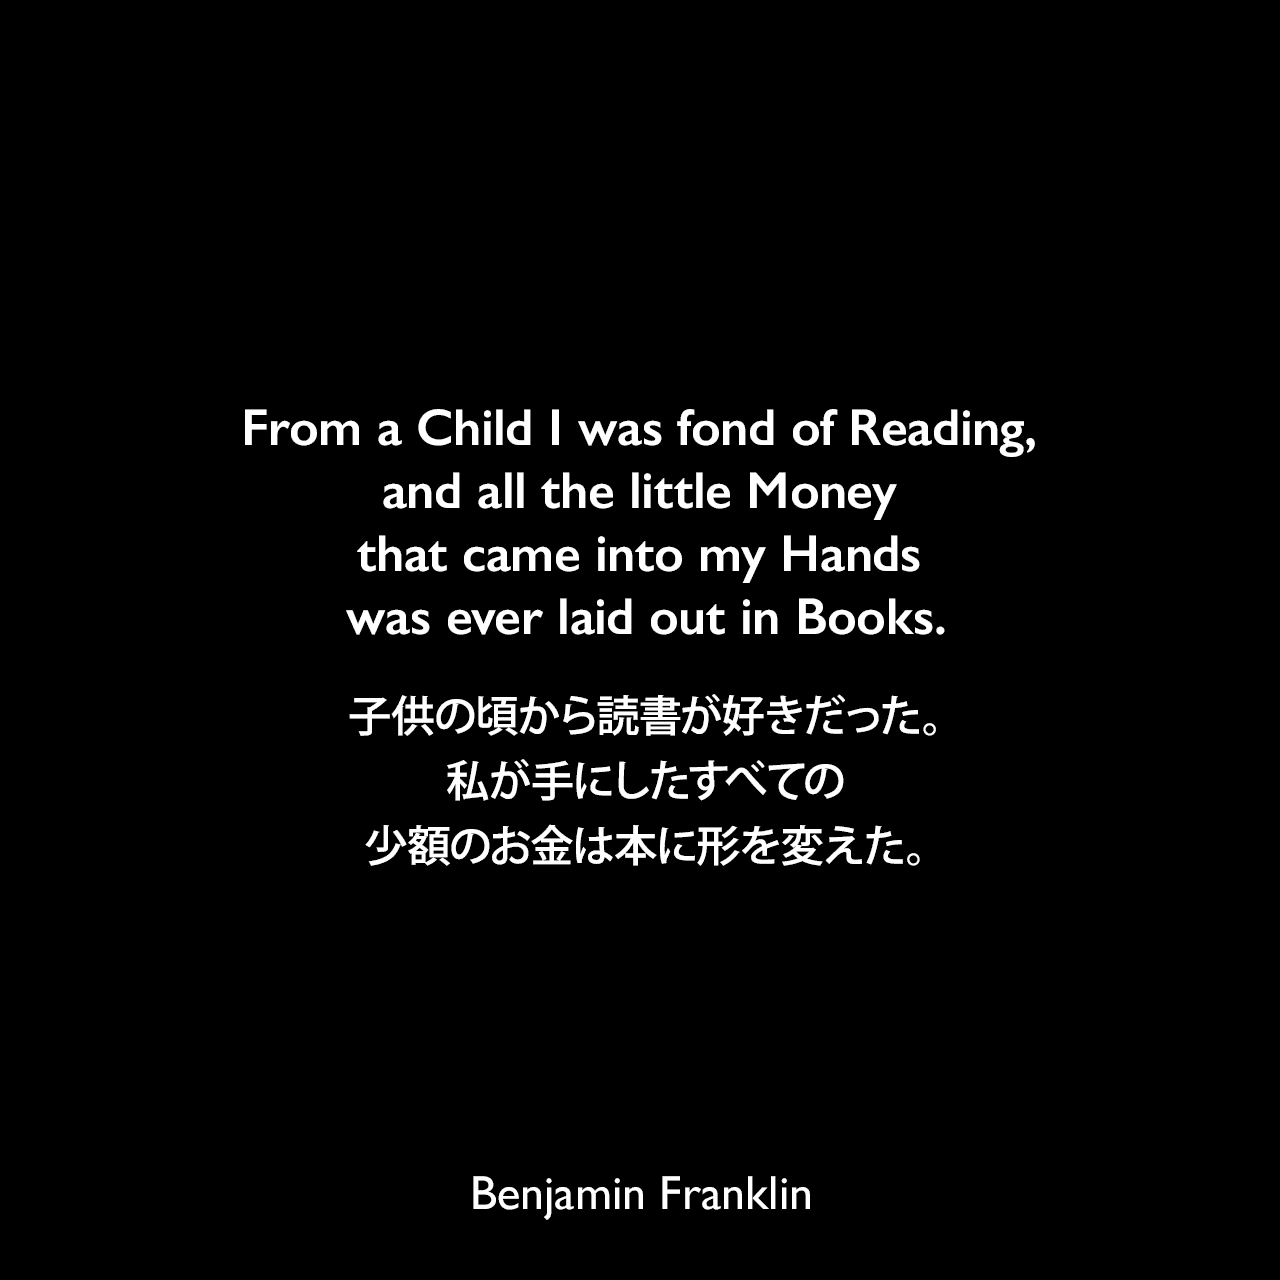 From a Child I was fond of Reading, and all the little Money that came into my Hands was ever laid out in Books.子供の頃から読書が好きだった。私が手にしたすべての少額のお金は本に形を変えた。- ベンジャミン・フランクリンによる本「フランクリン自伝（1791年）」よりBenjamin Franklin